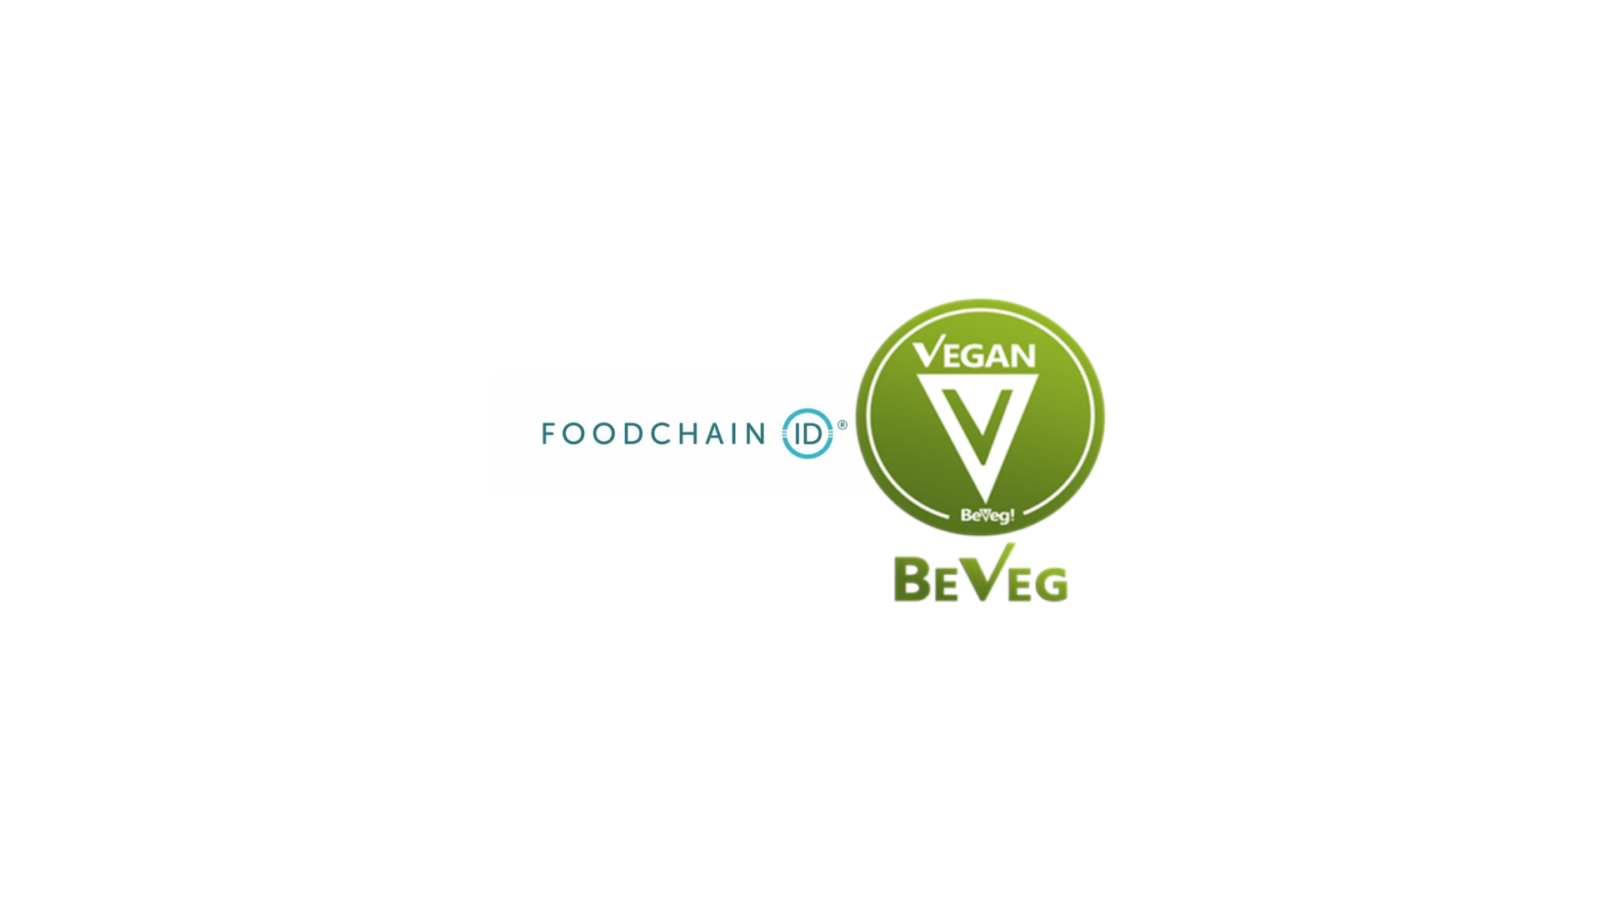 FoodChain ID partners with BeVeg to ensure strict veganism in products